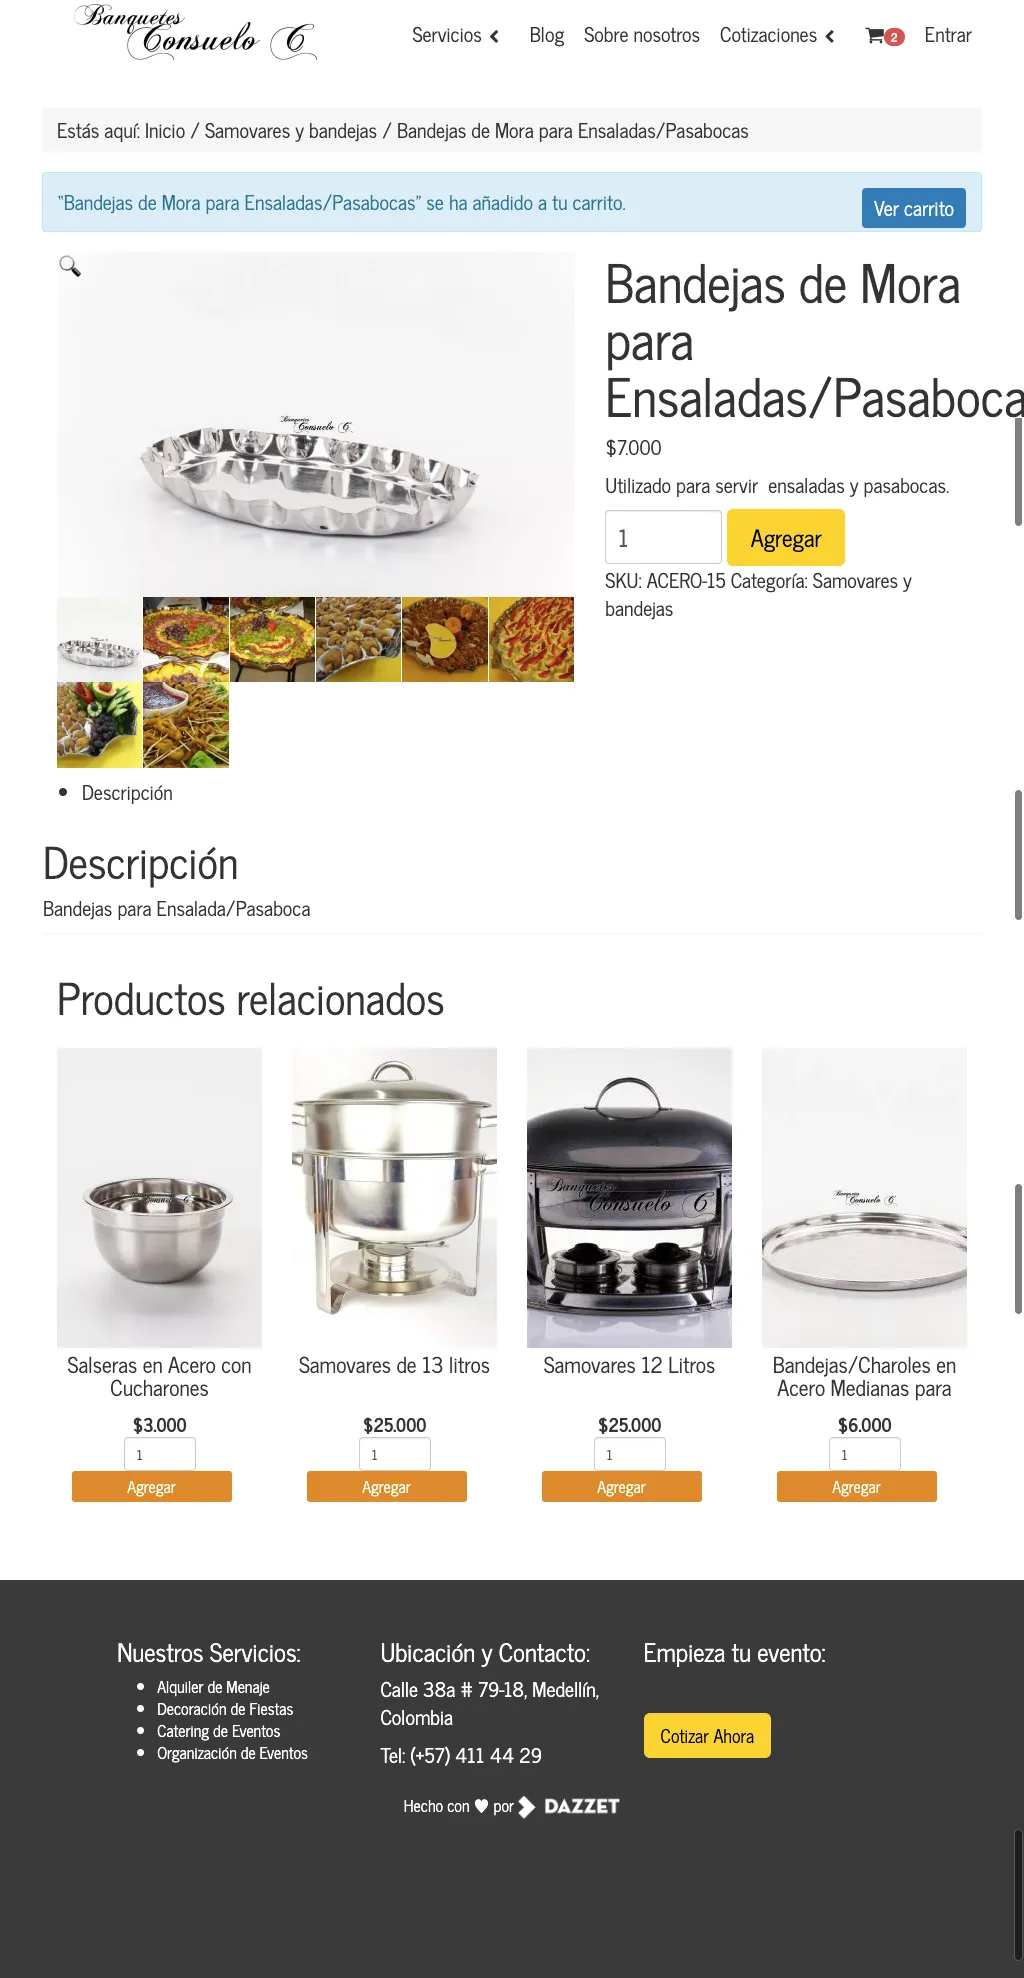 Banquetes Consuelo C Product page